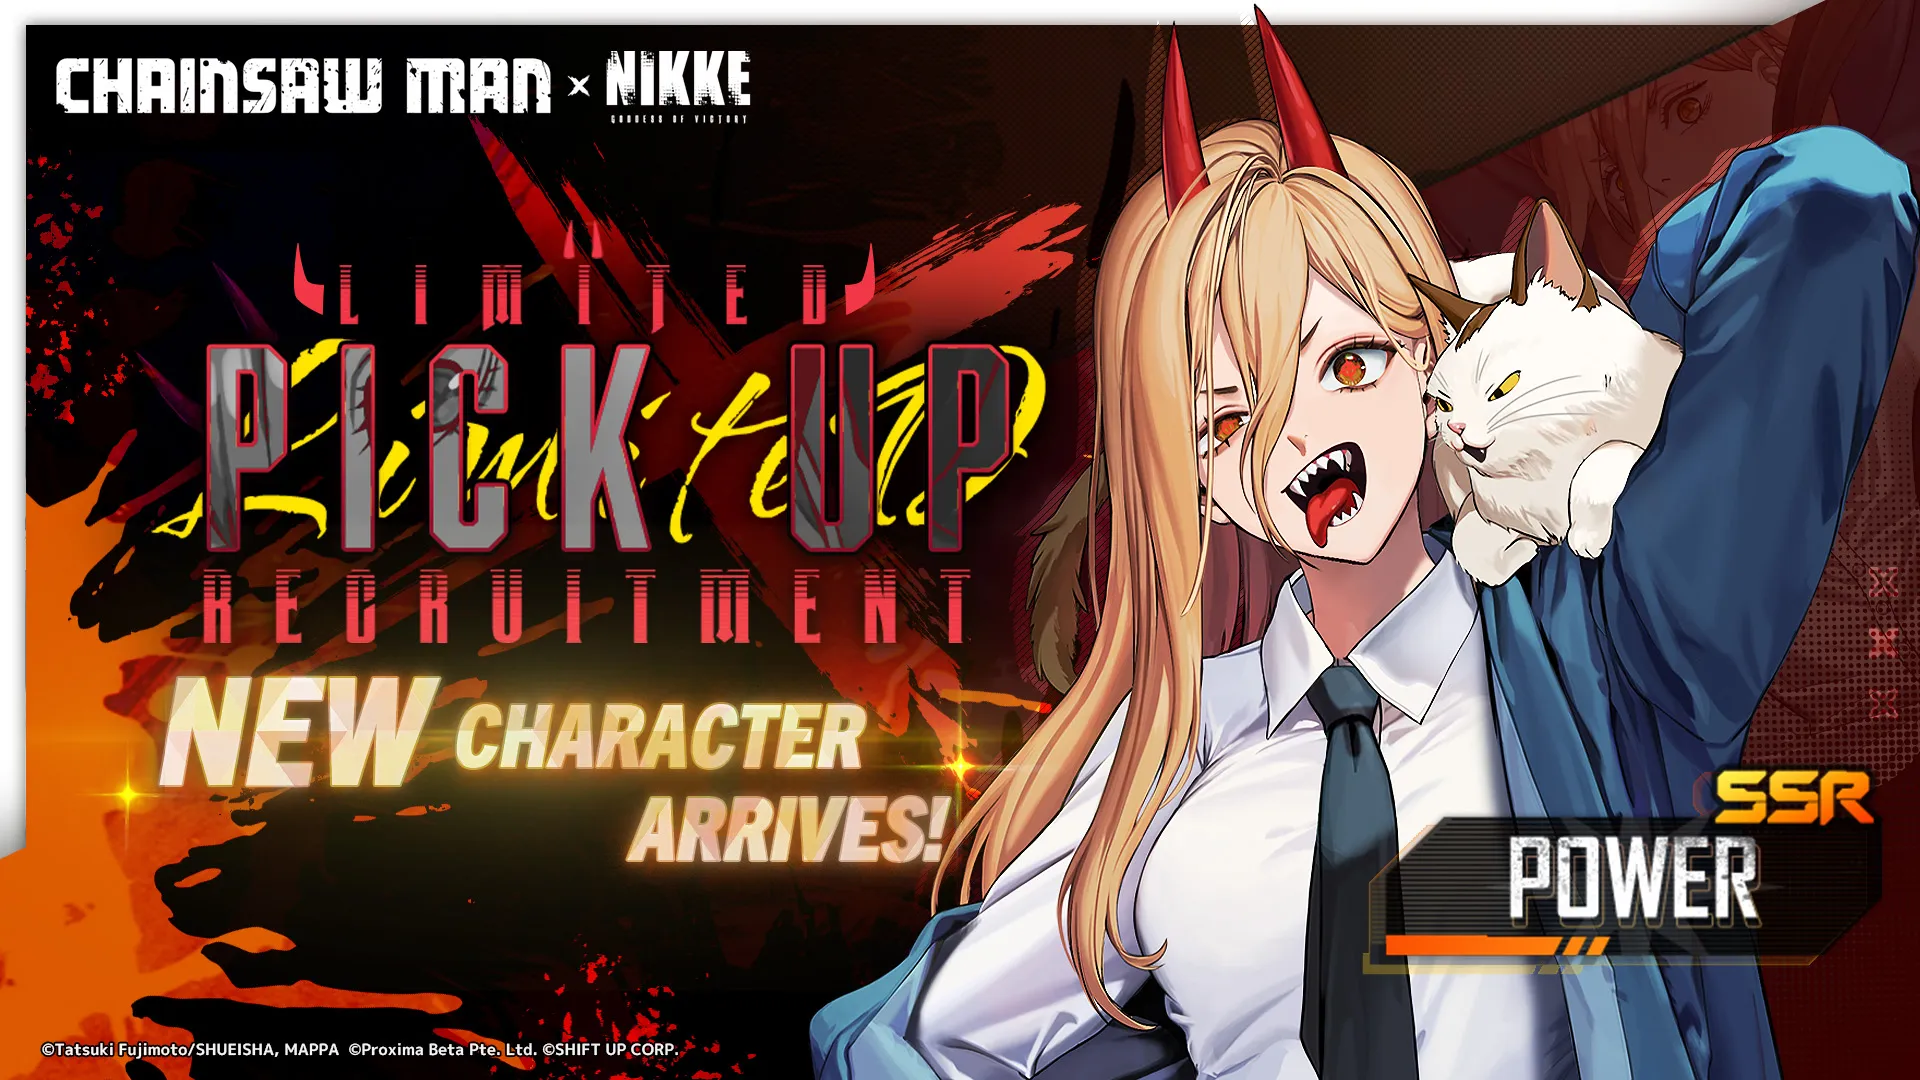 Chainsaw Man x Nikke Crossover Event Adds 3 Devil Hunter Characters